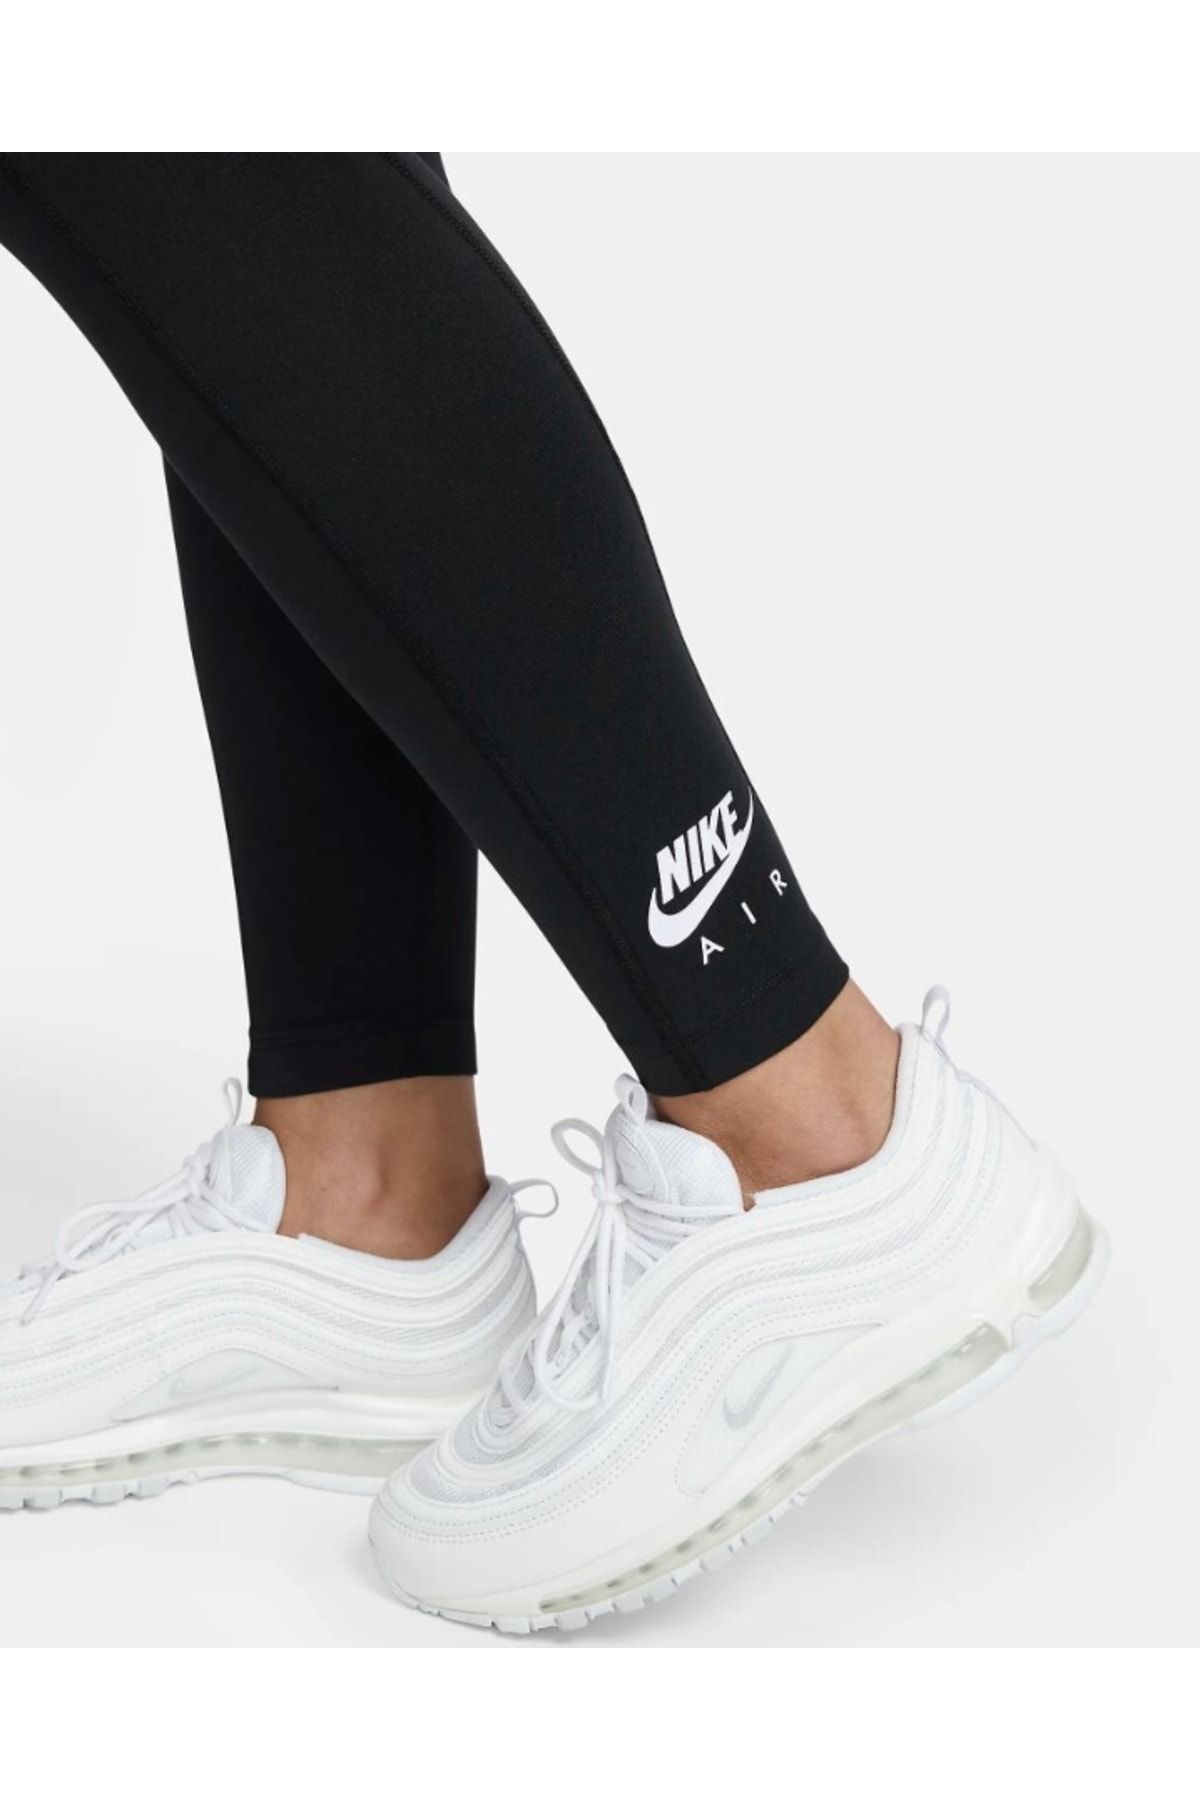 Nike W Nsw Air Tights Hr High Waisted Women's Tights - Trendyol